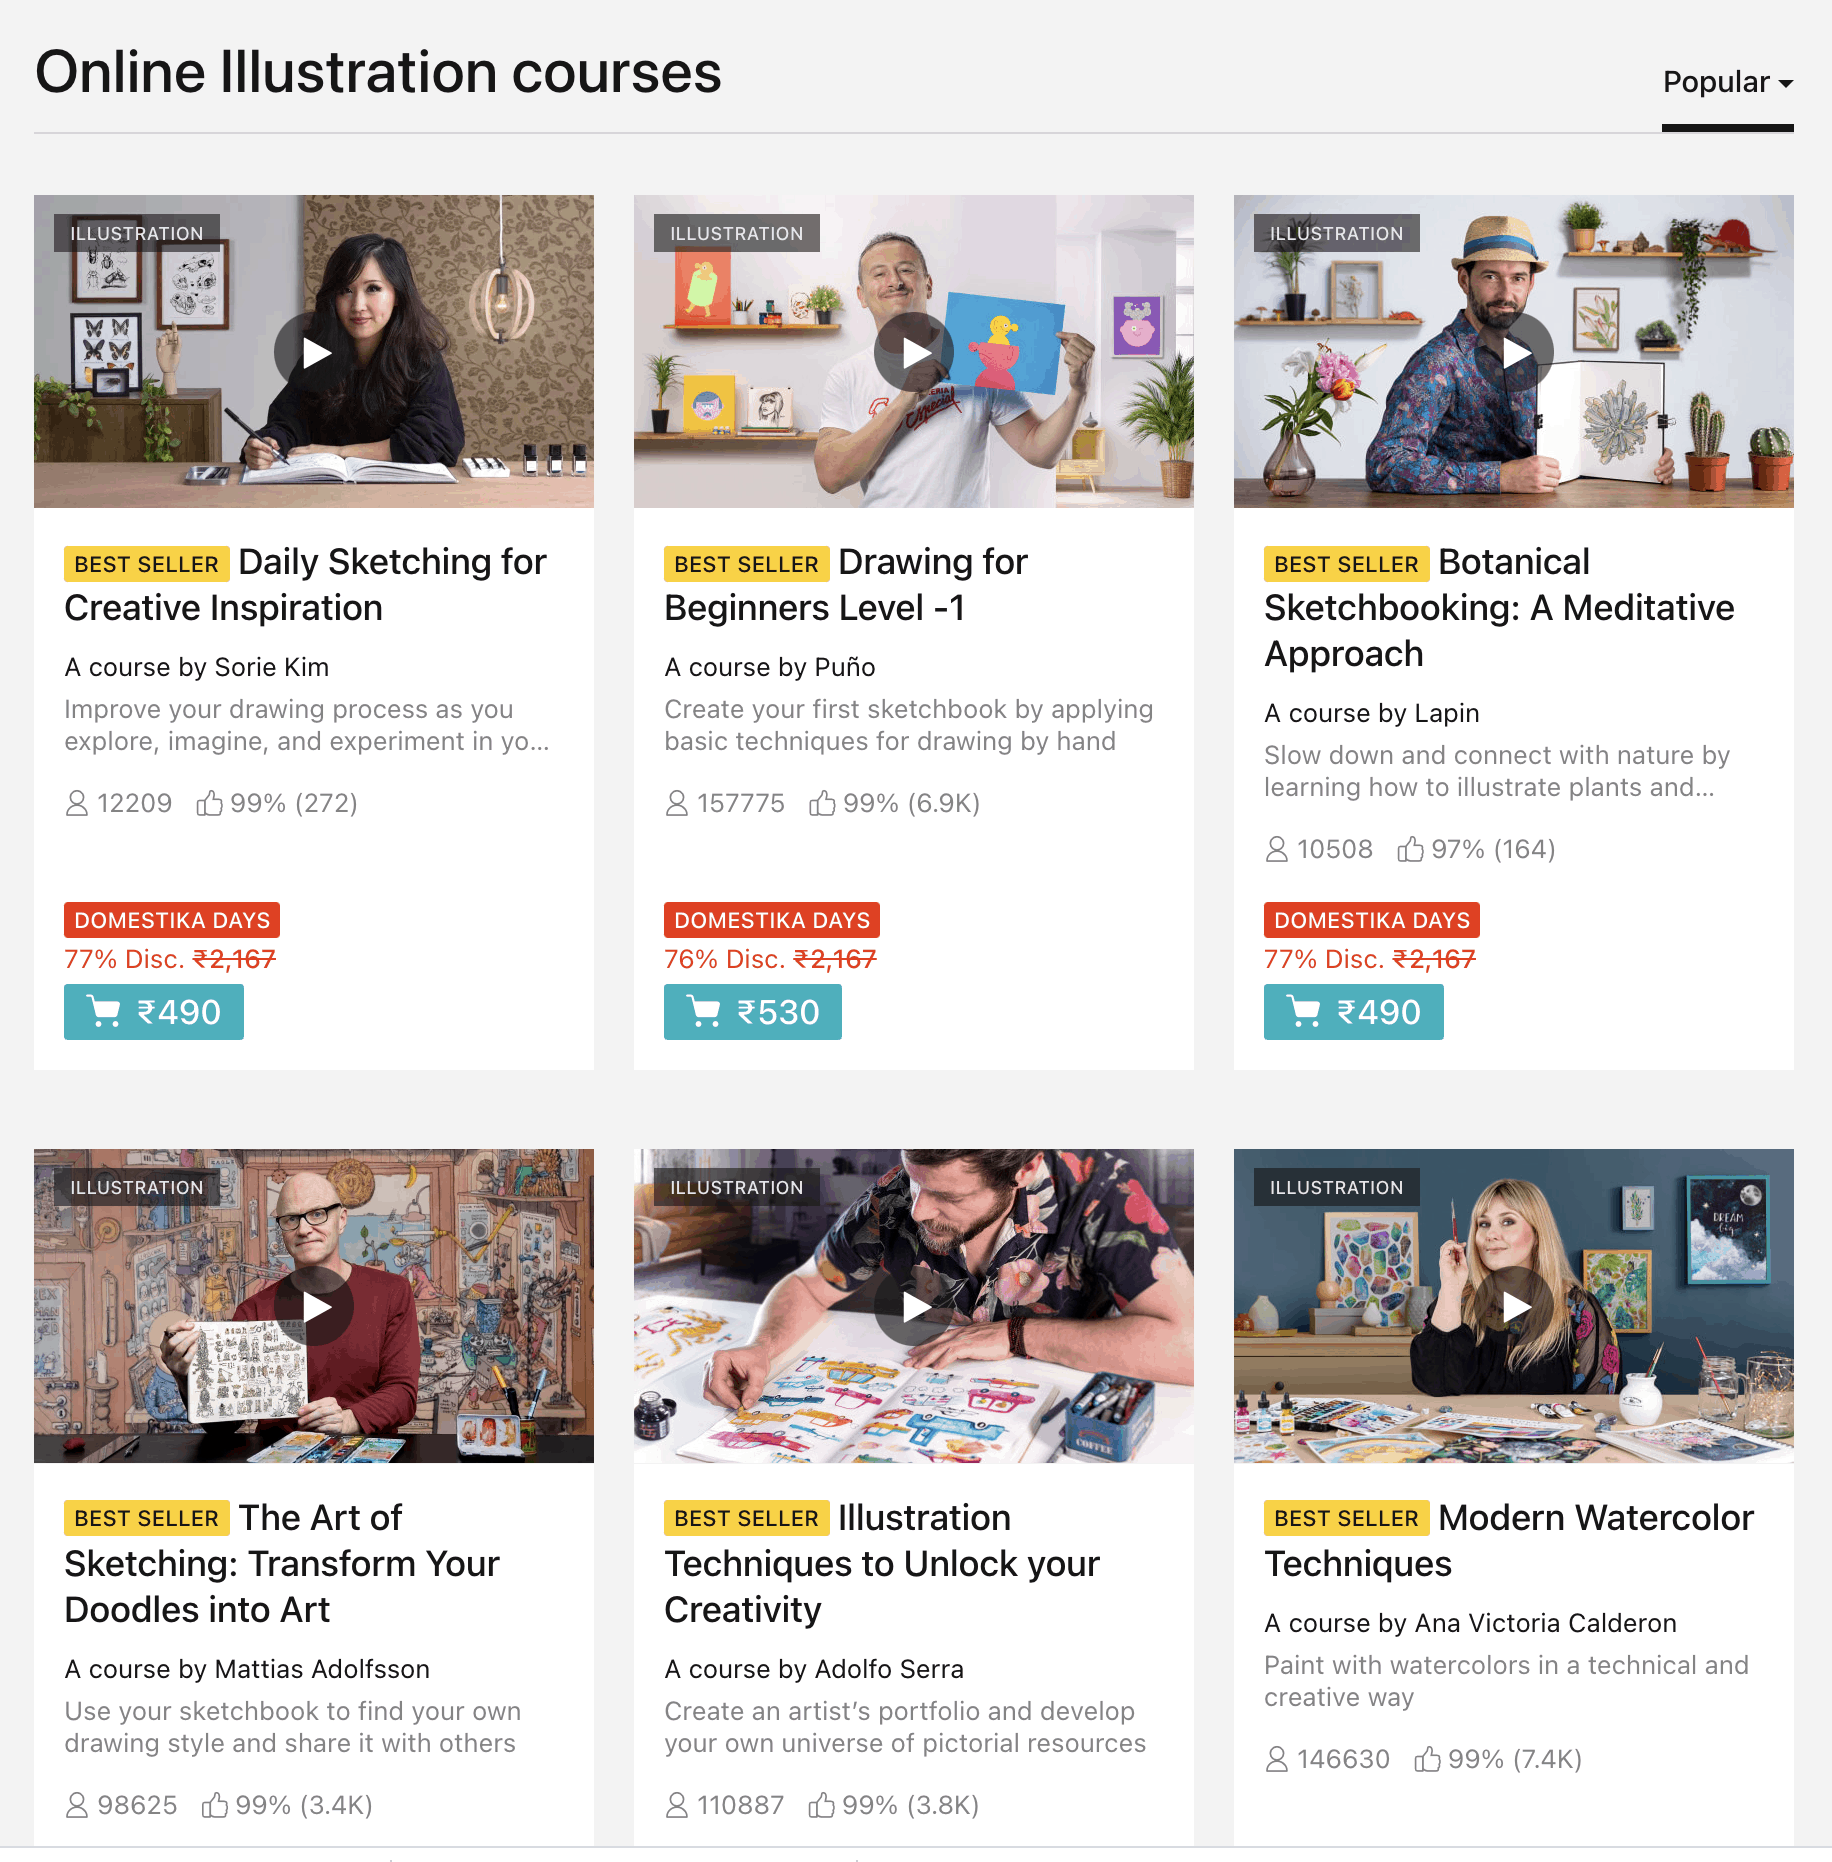 Domestika has a lot of art courses for anyone looking to improve their art. 